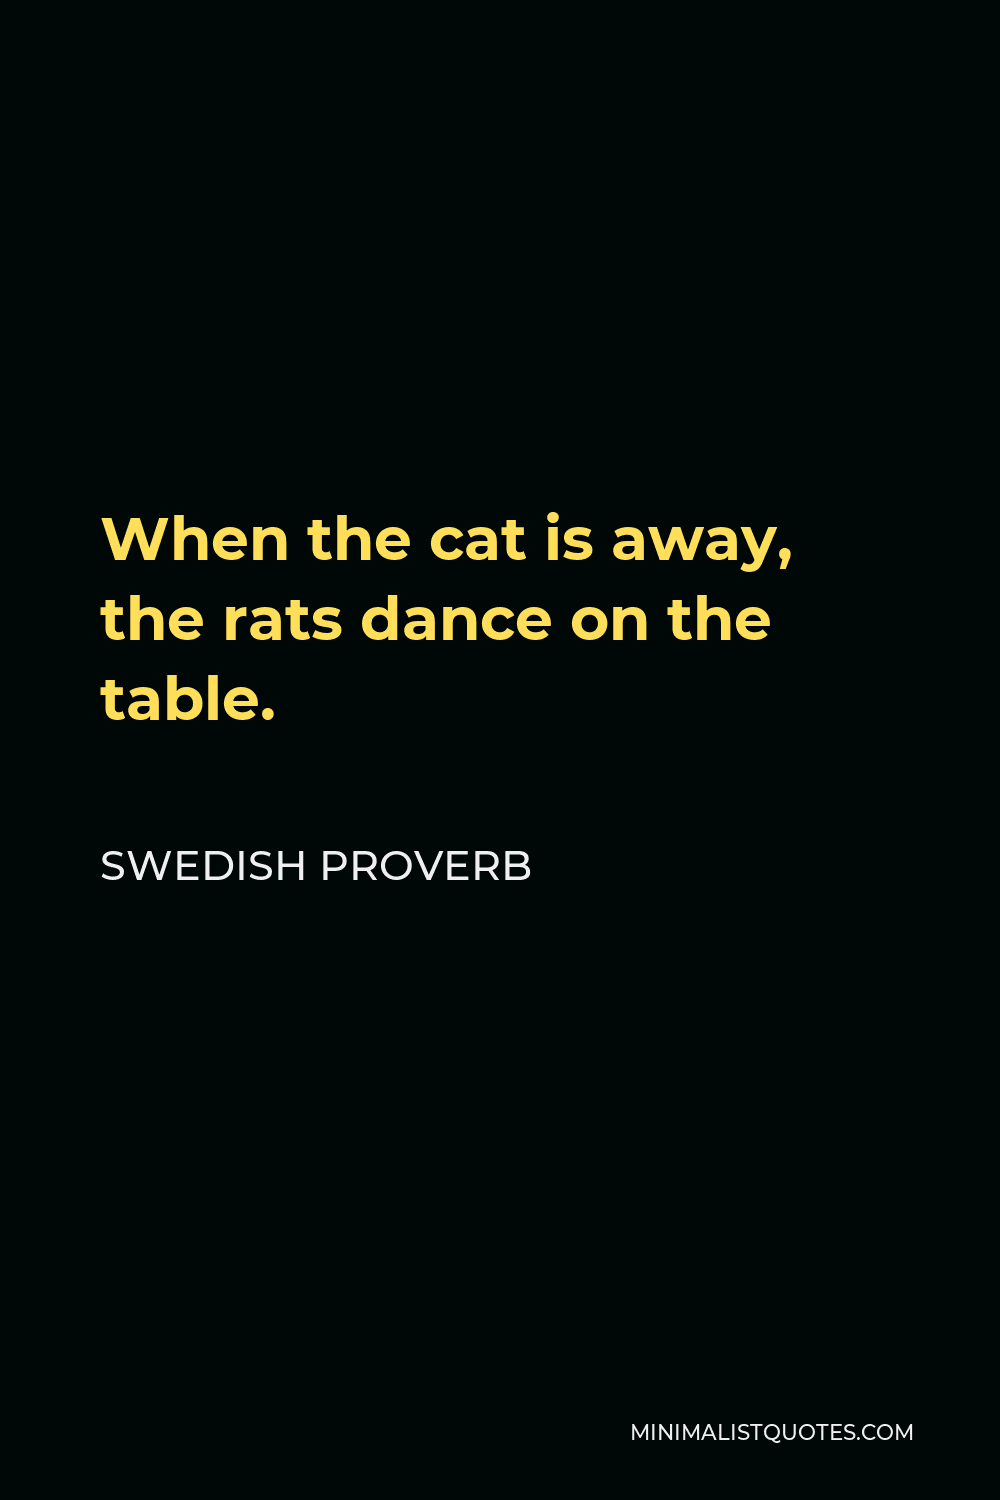 Swedish Proverb Quote - When the cat is away, the rats dance on the table.